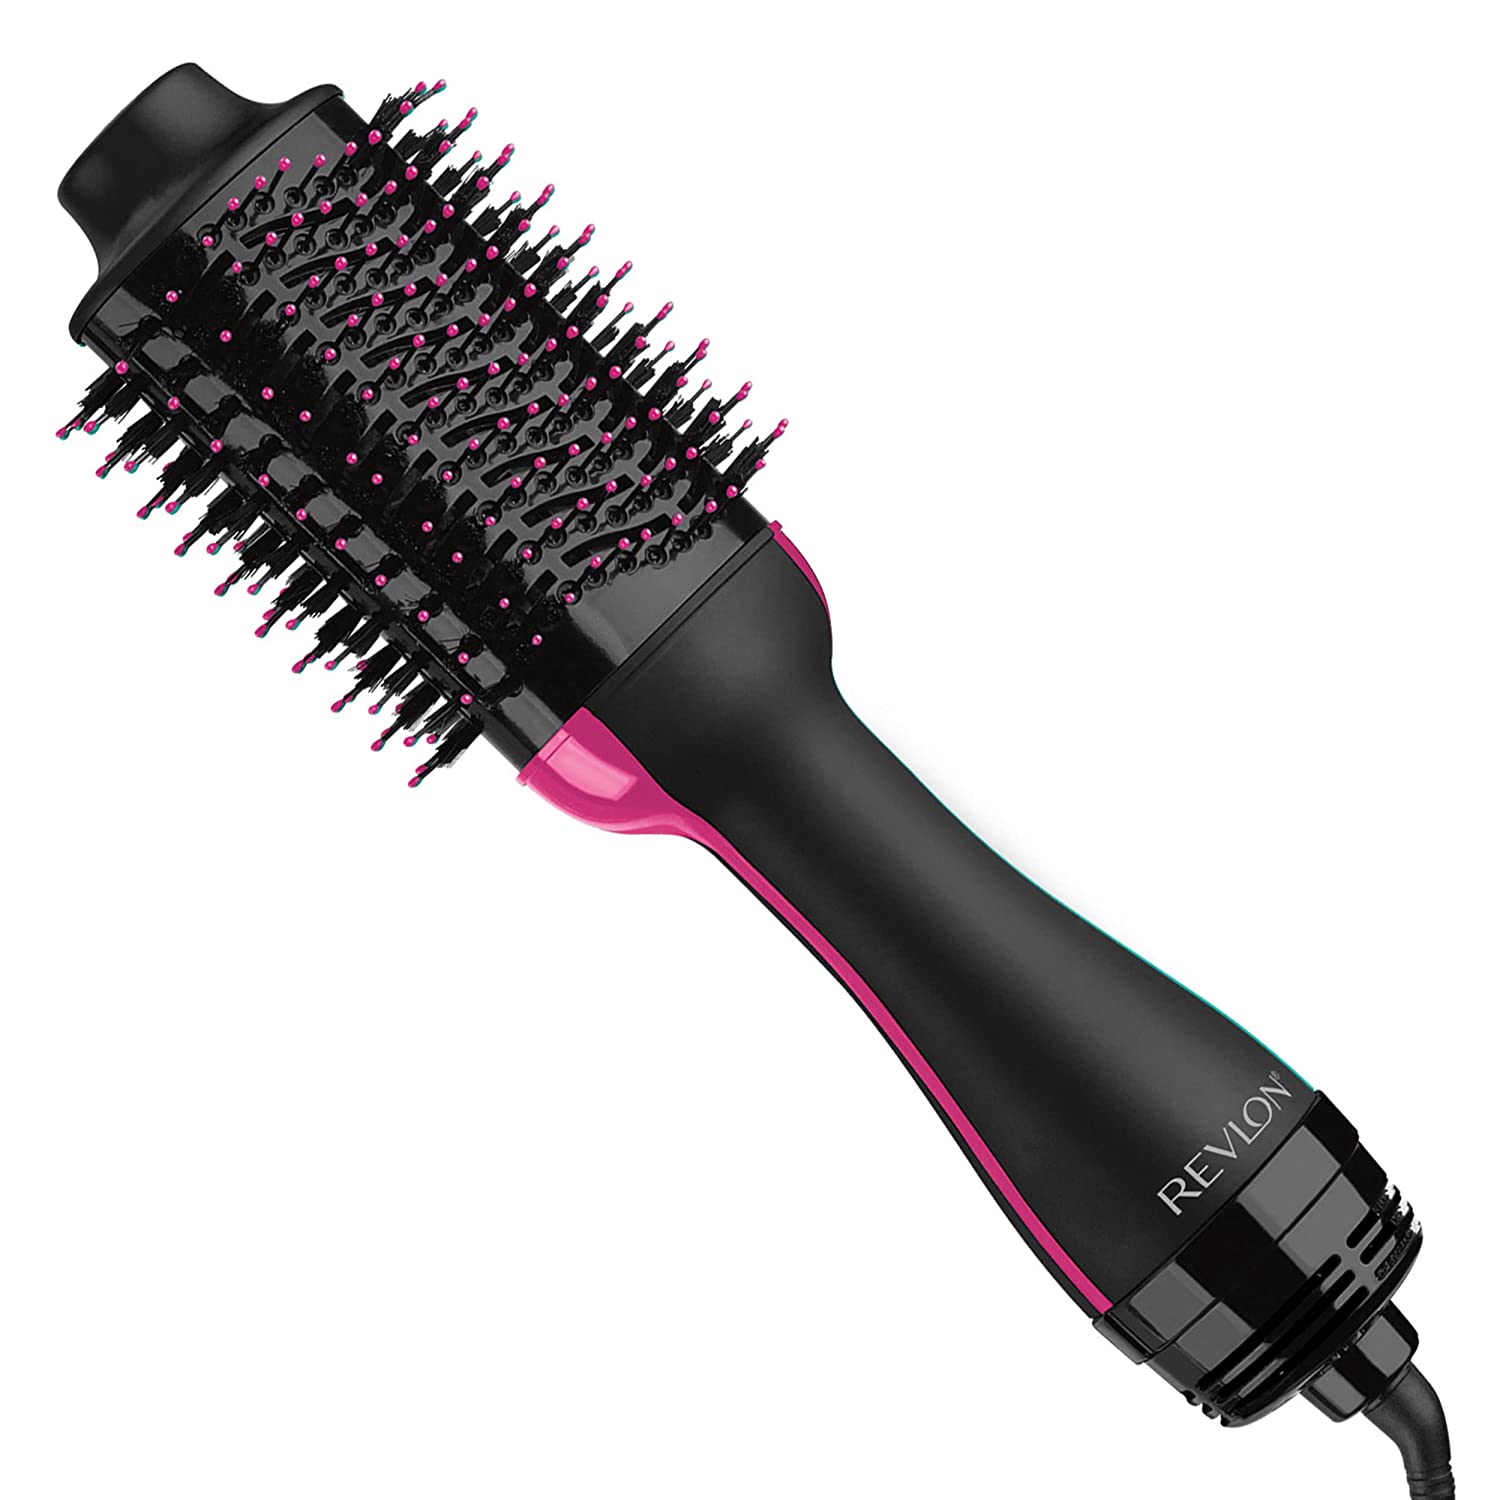  6. Revlon One-Step Hair Dryer and Volumizer is the best brush. 